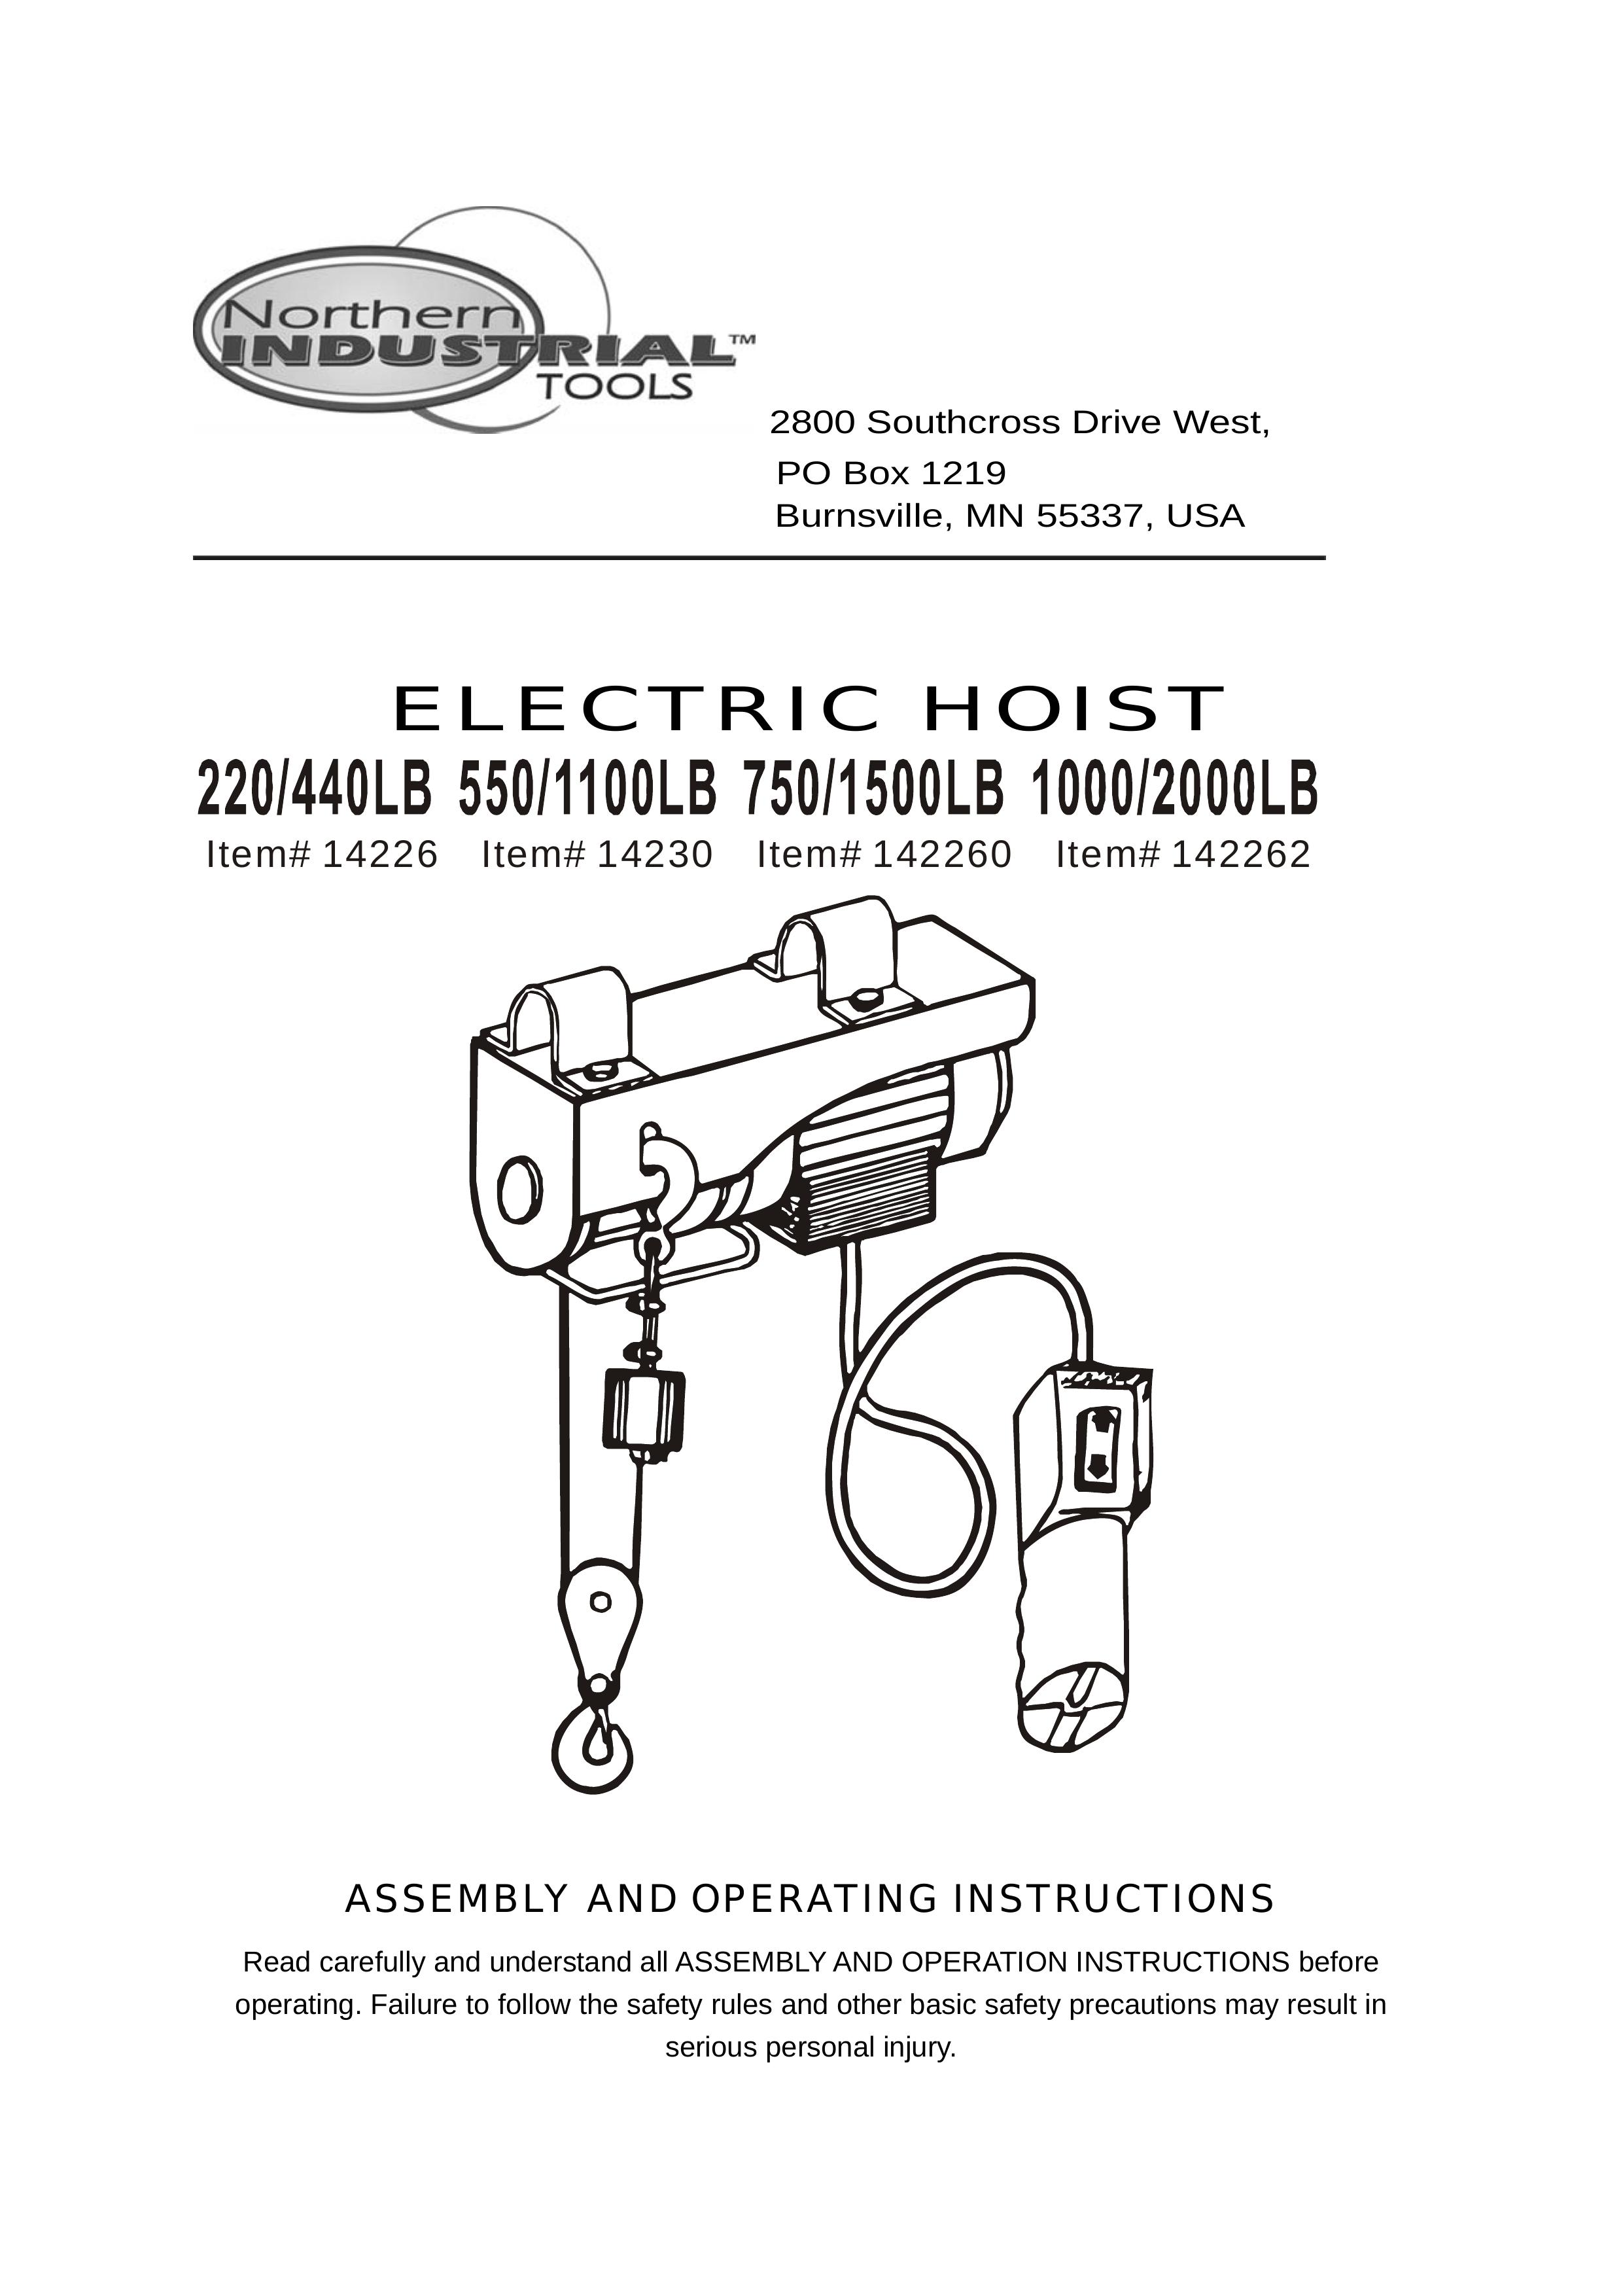 Northern Industrial Tools 14230 Personal Lift User Manual